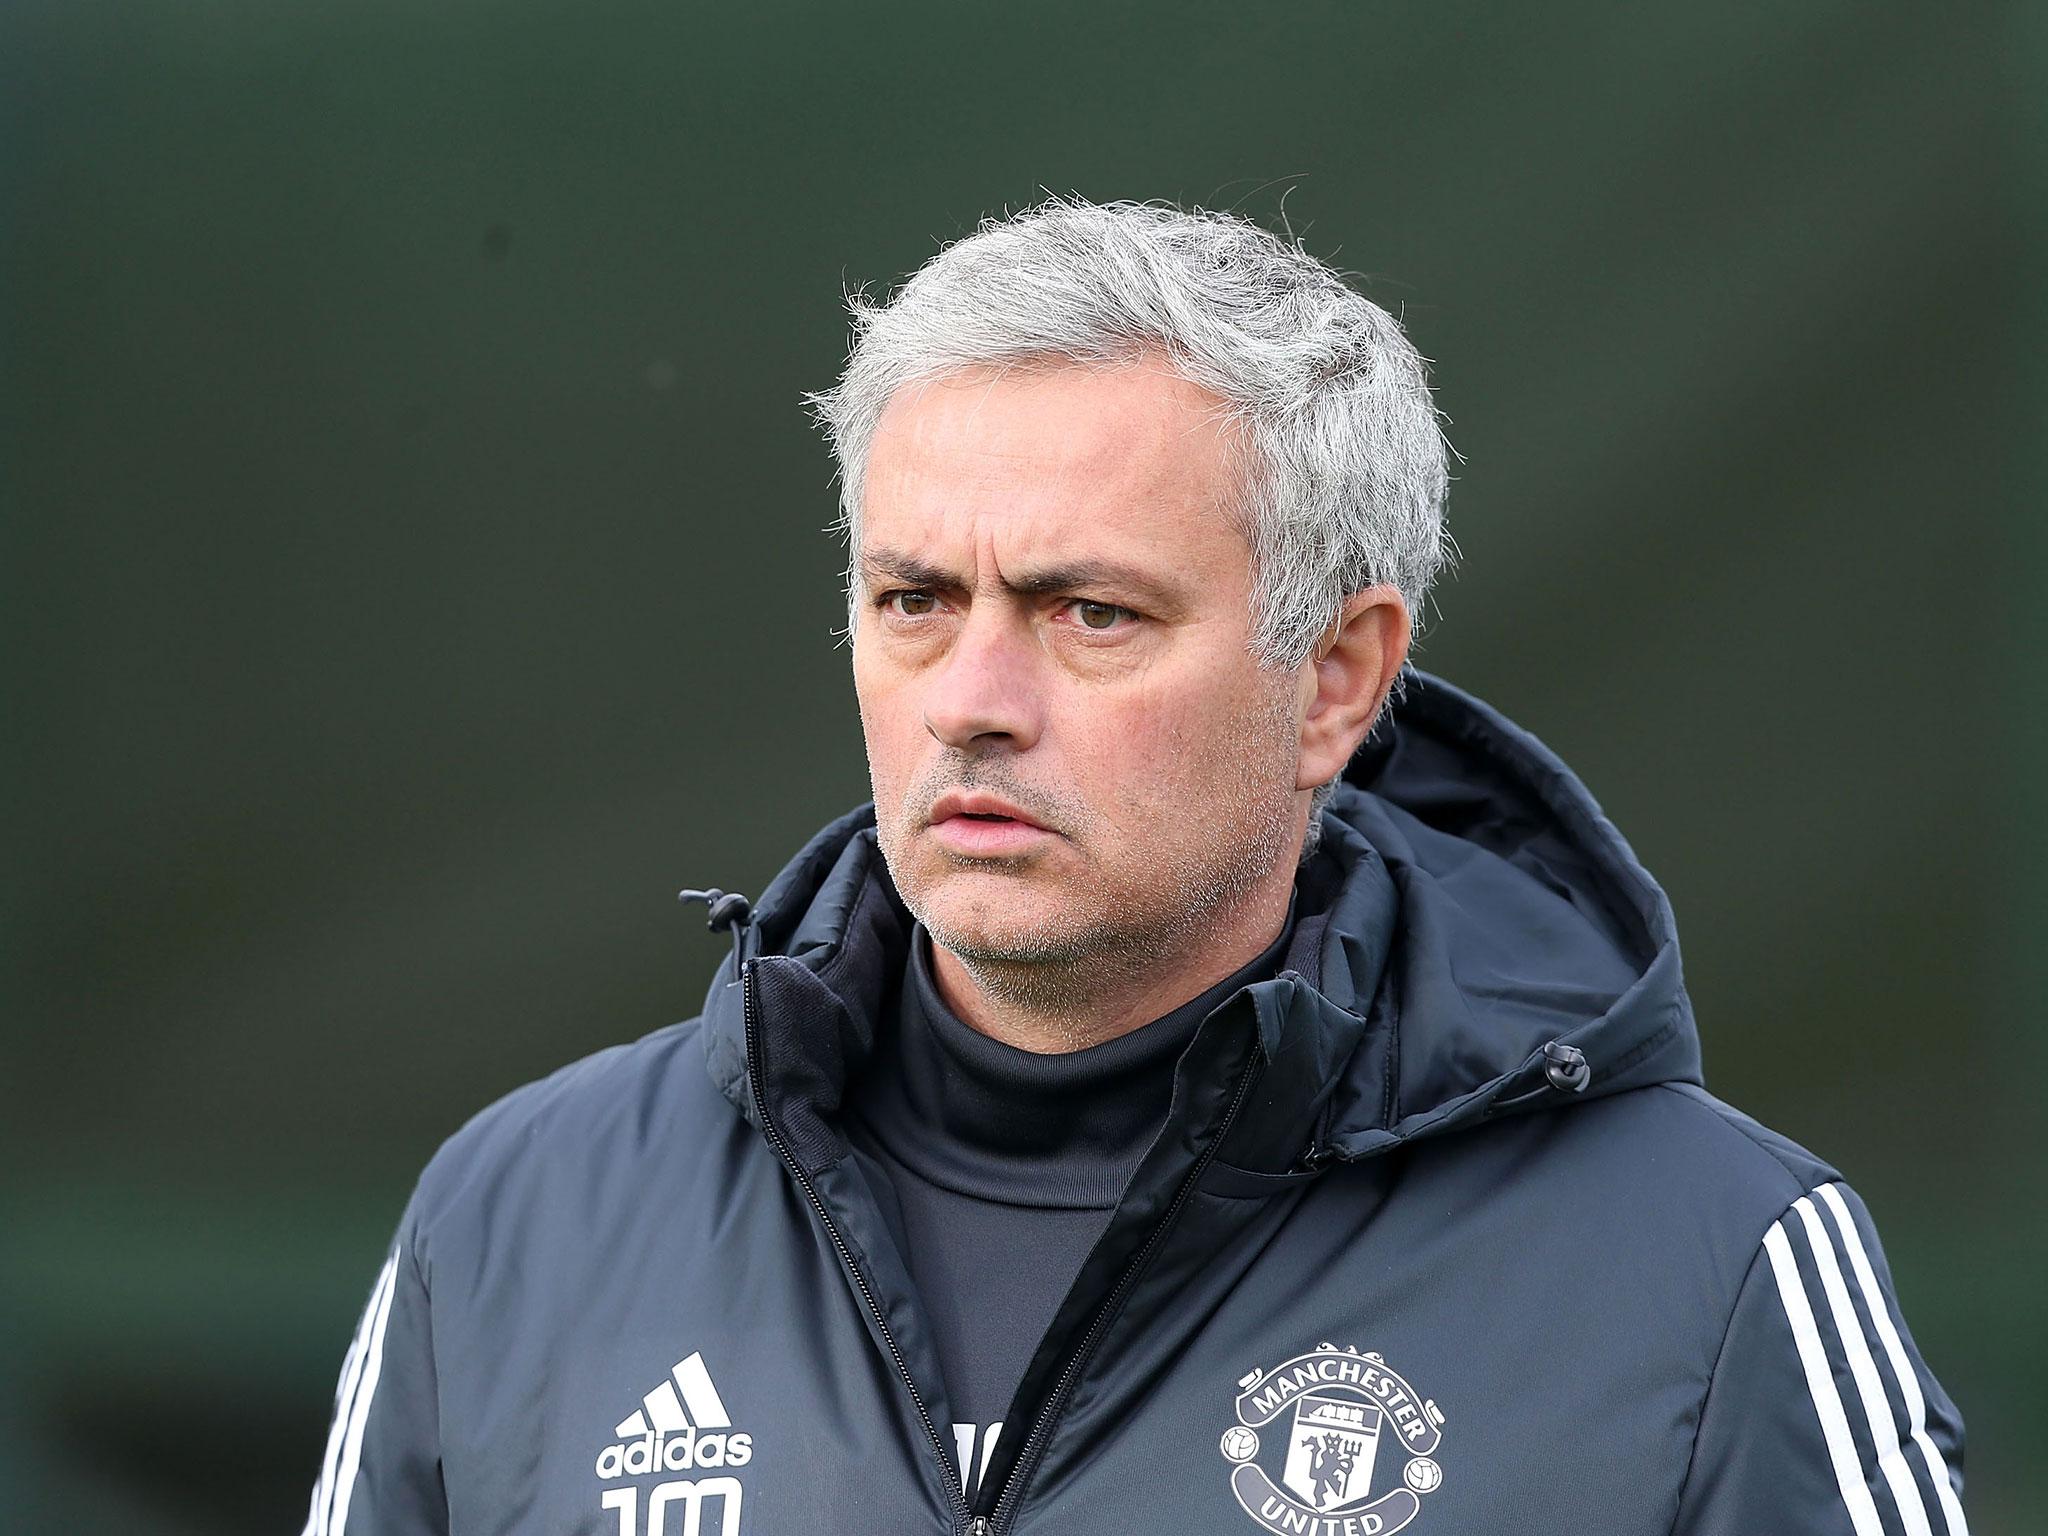 Jose Mourinho heavily criticised his players after last week's defeat